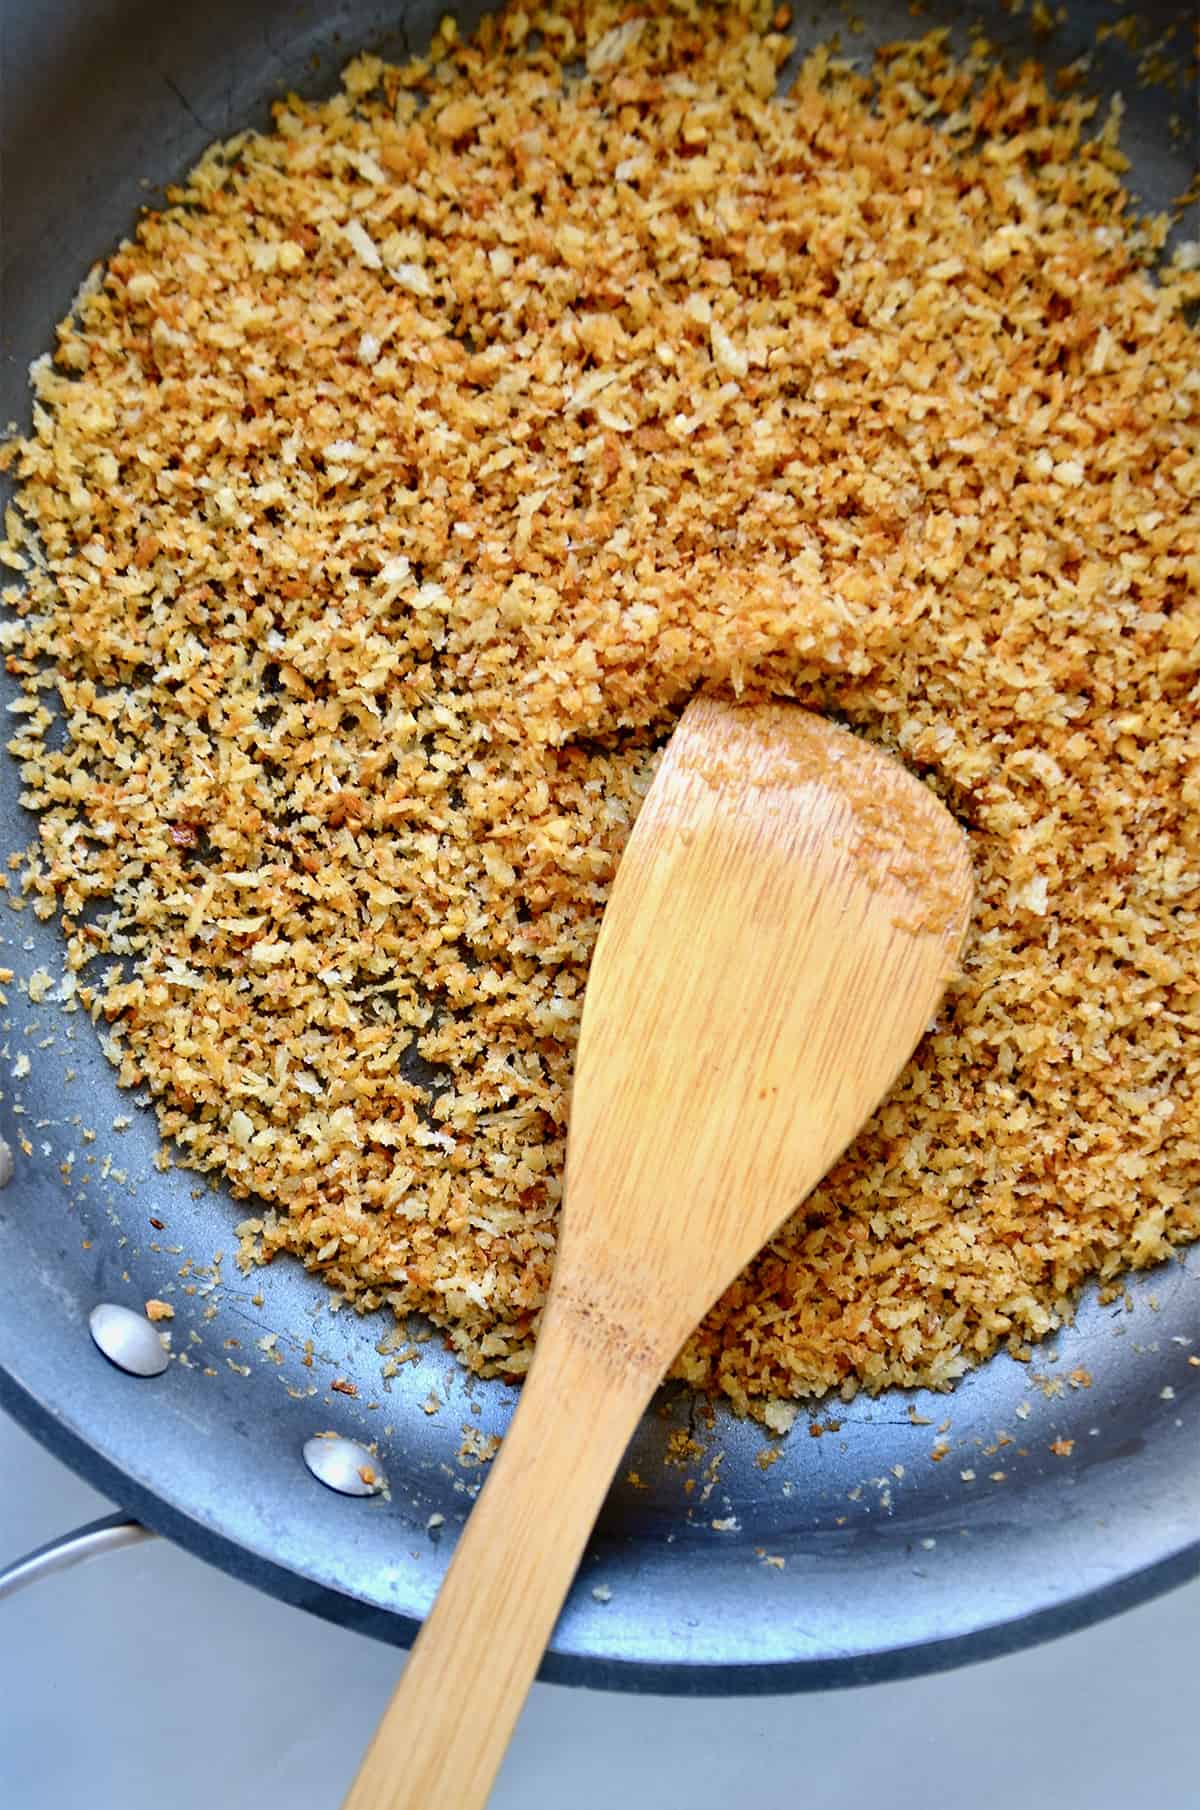 Toasted breadcrumbs in a nonstick skillet. A spoon rests against the side of the skillet.